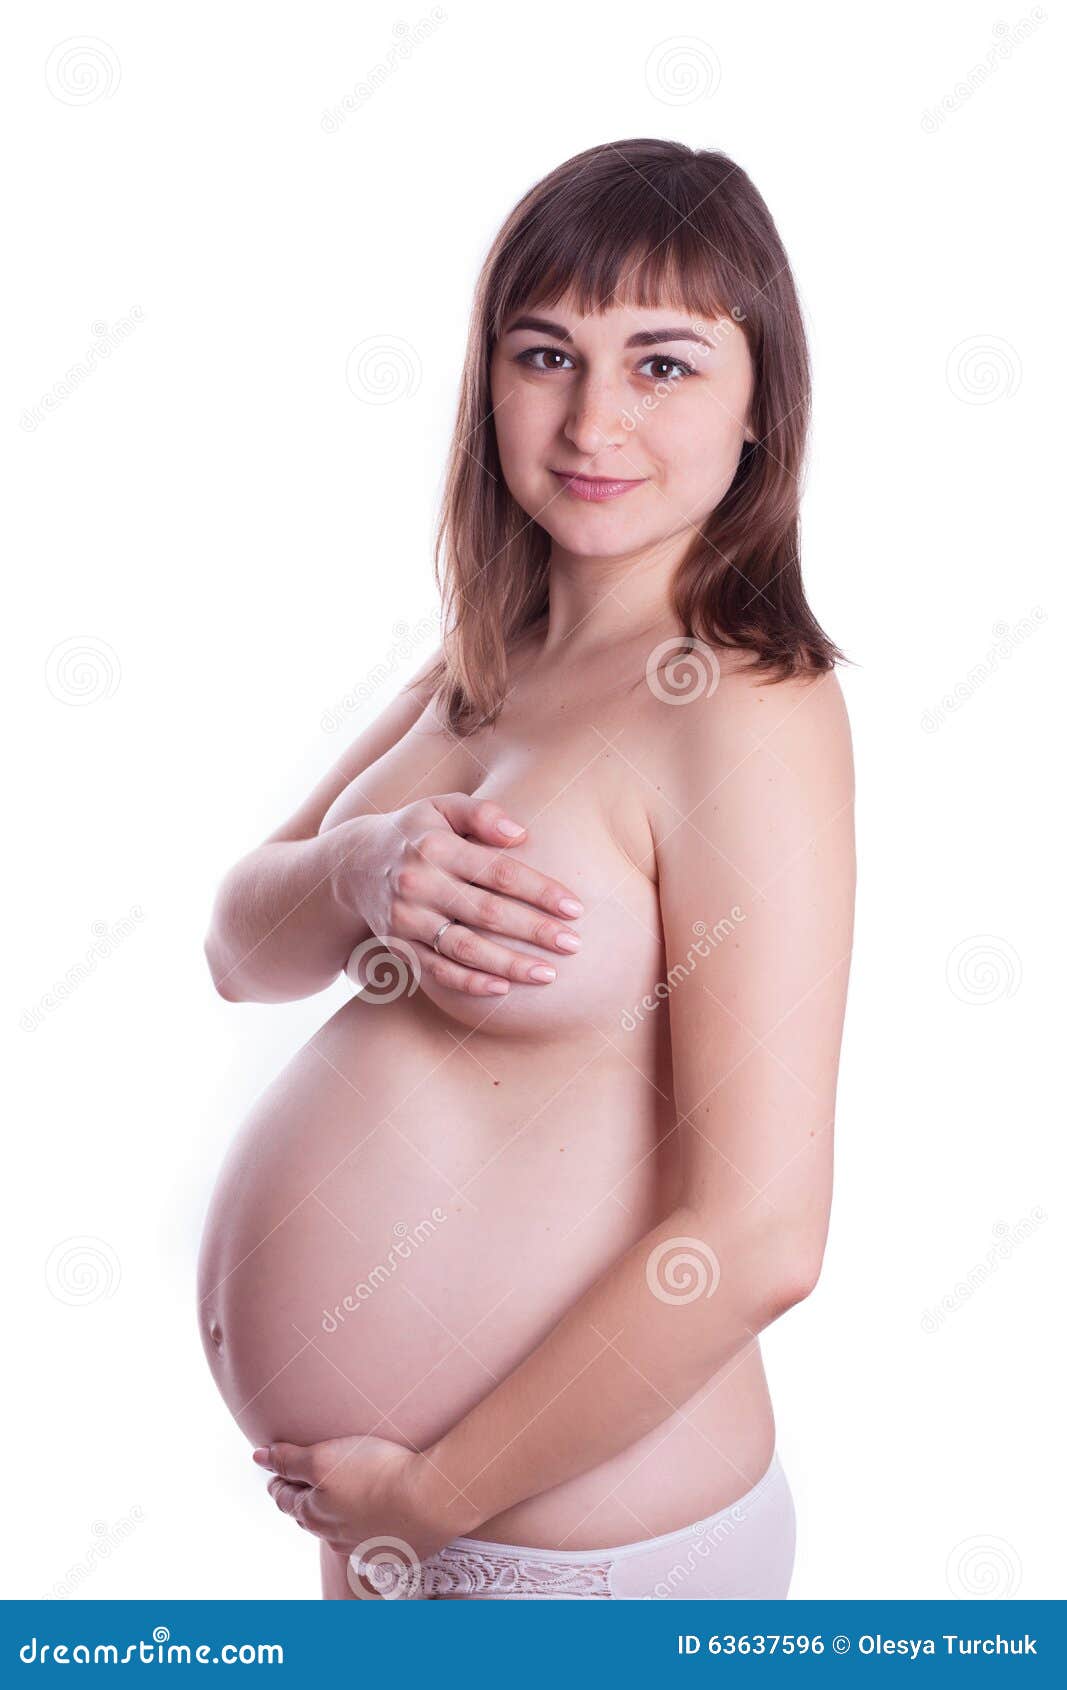 Cute Pregnant Girls Naked - Portrait Of A Nude Pregnant Woman Girl Stock Photo - Image ...